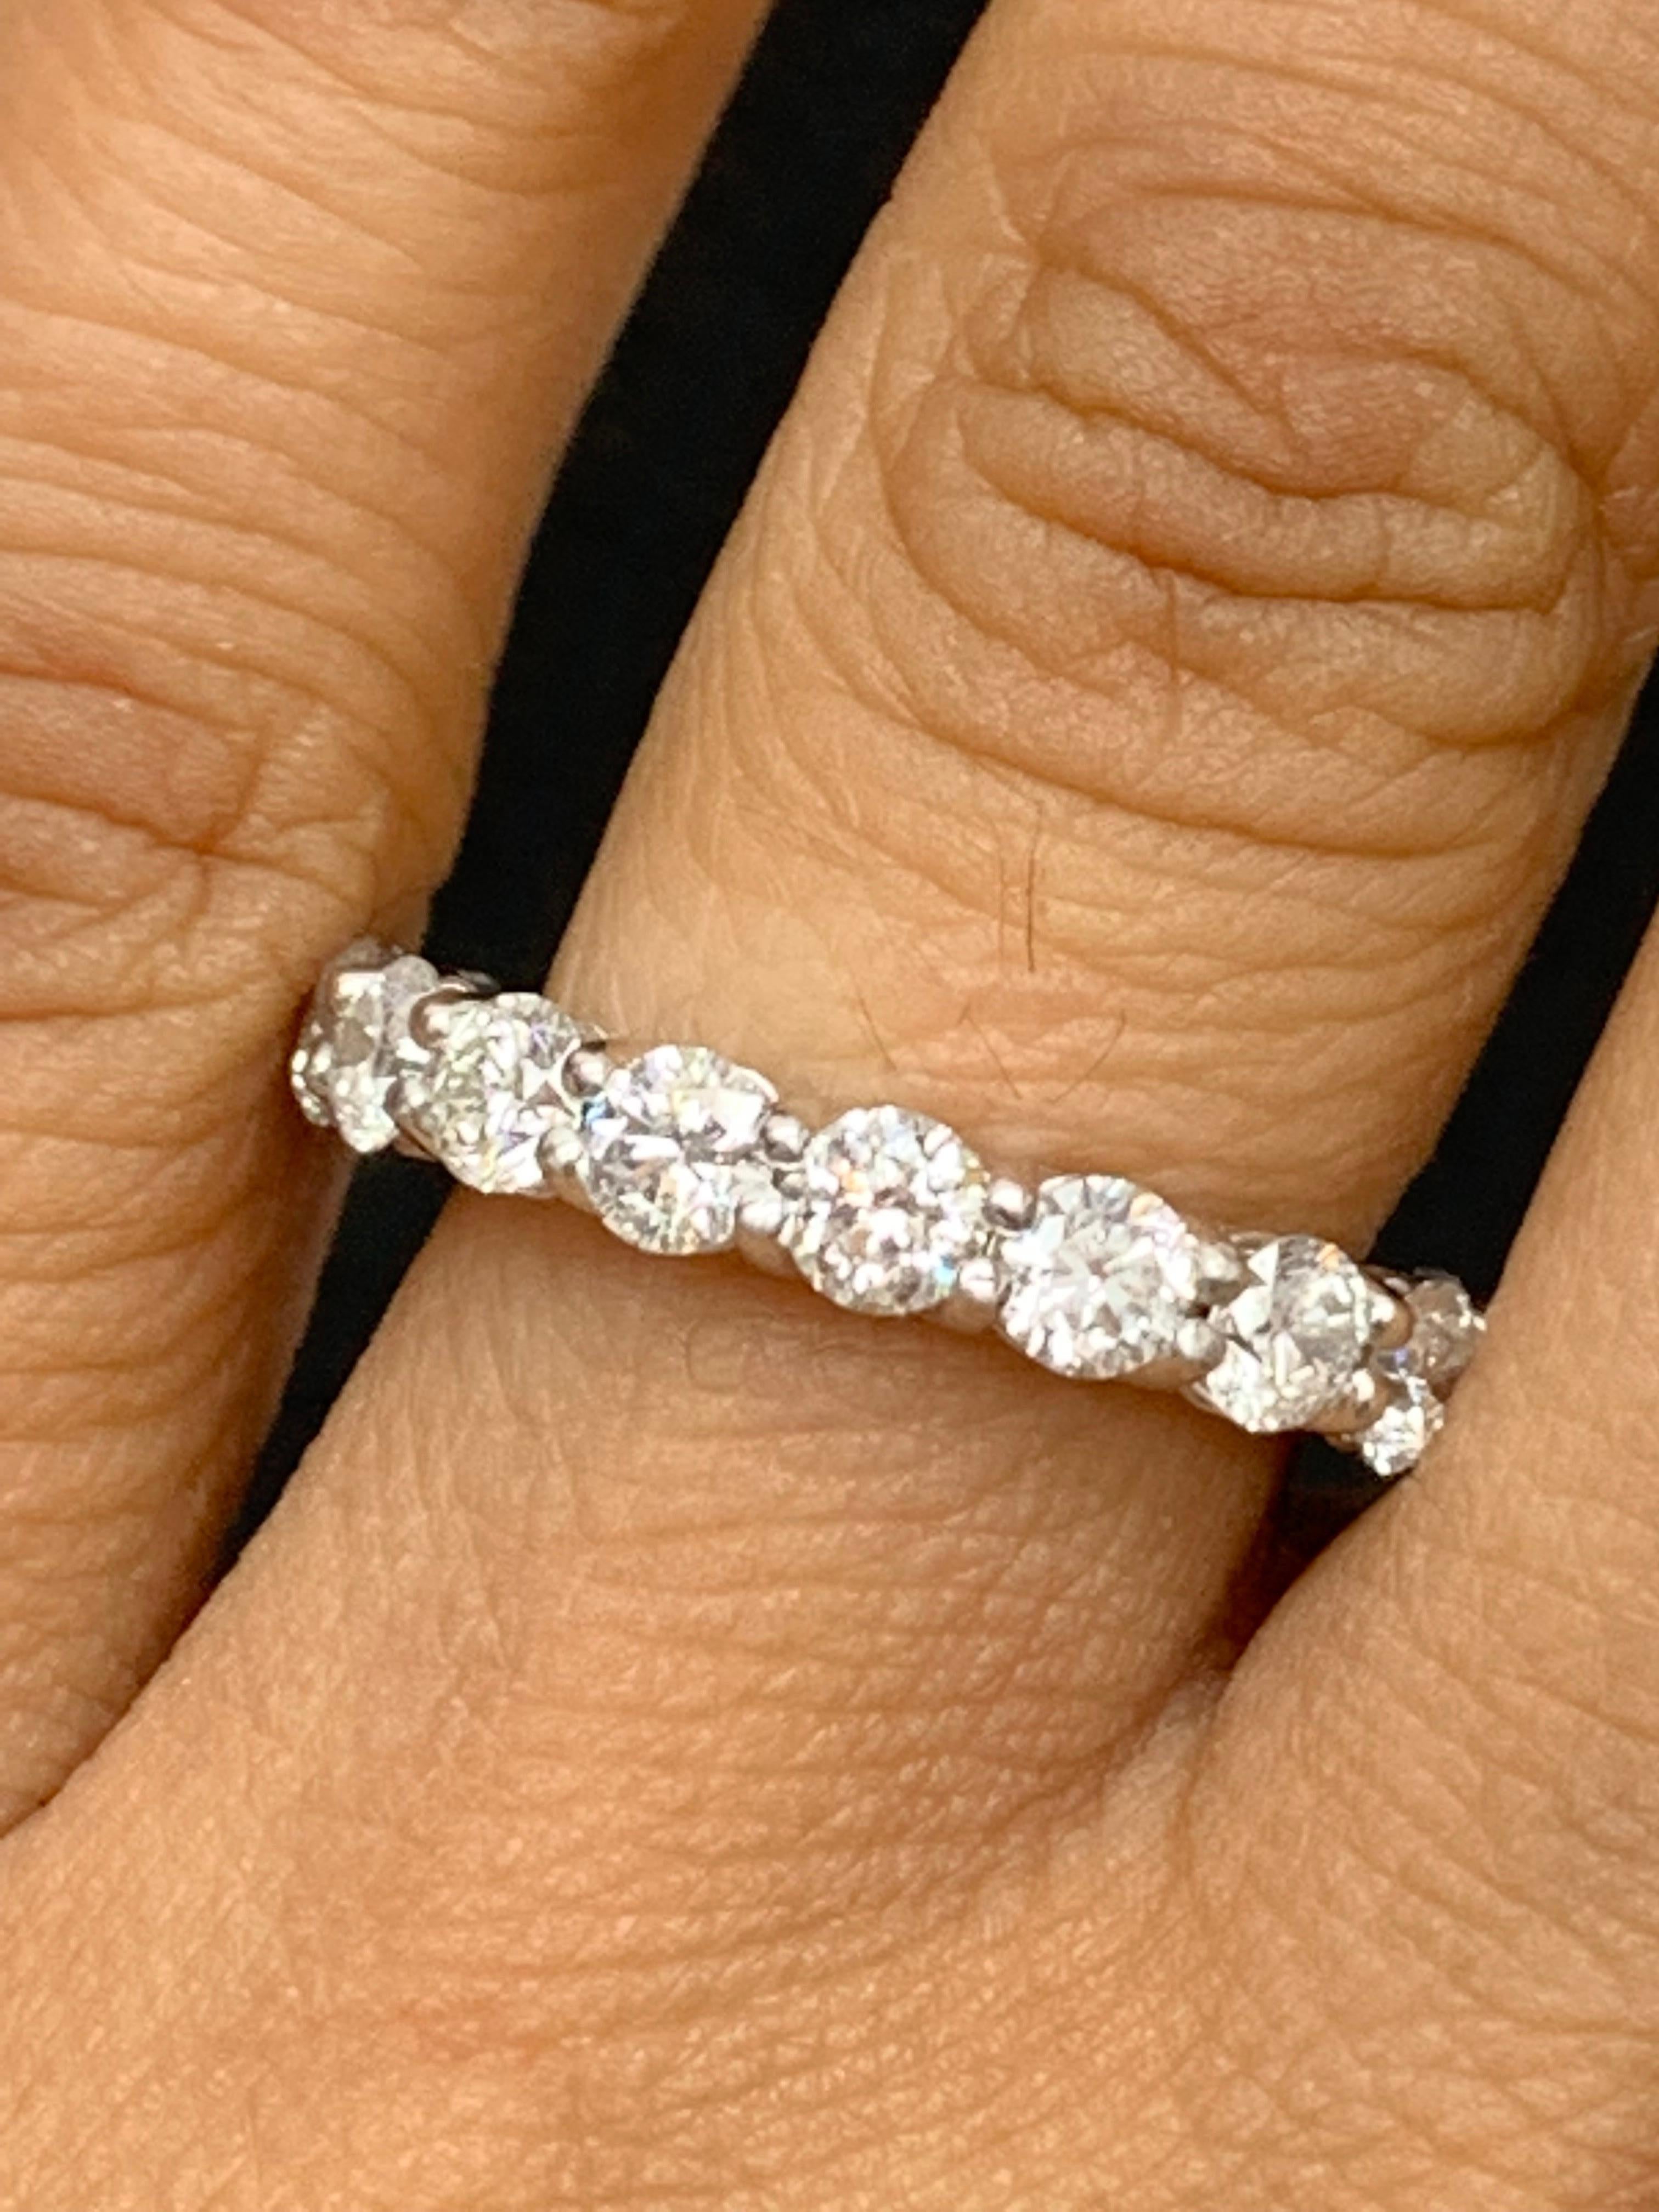 A classic and timeless eternity band style showcasing a row of round brilliant diamonds set in a shared-prong 14k white gold mounting. 18 Diamonds weigh 4.01 carats.
Size 6.5 US (Sizable). One of a Kind piece.

All diamonds are GH color SI1